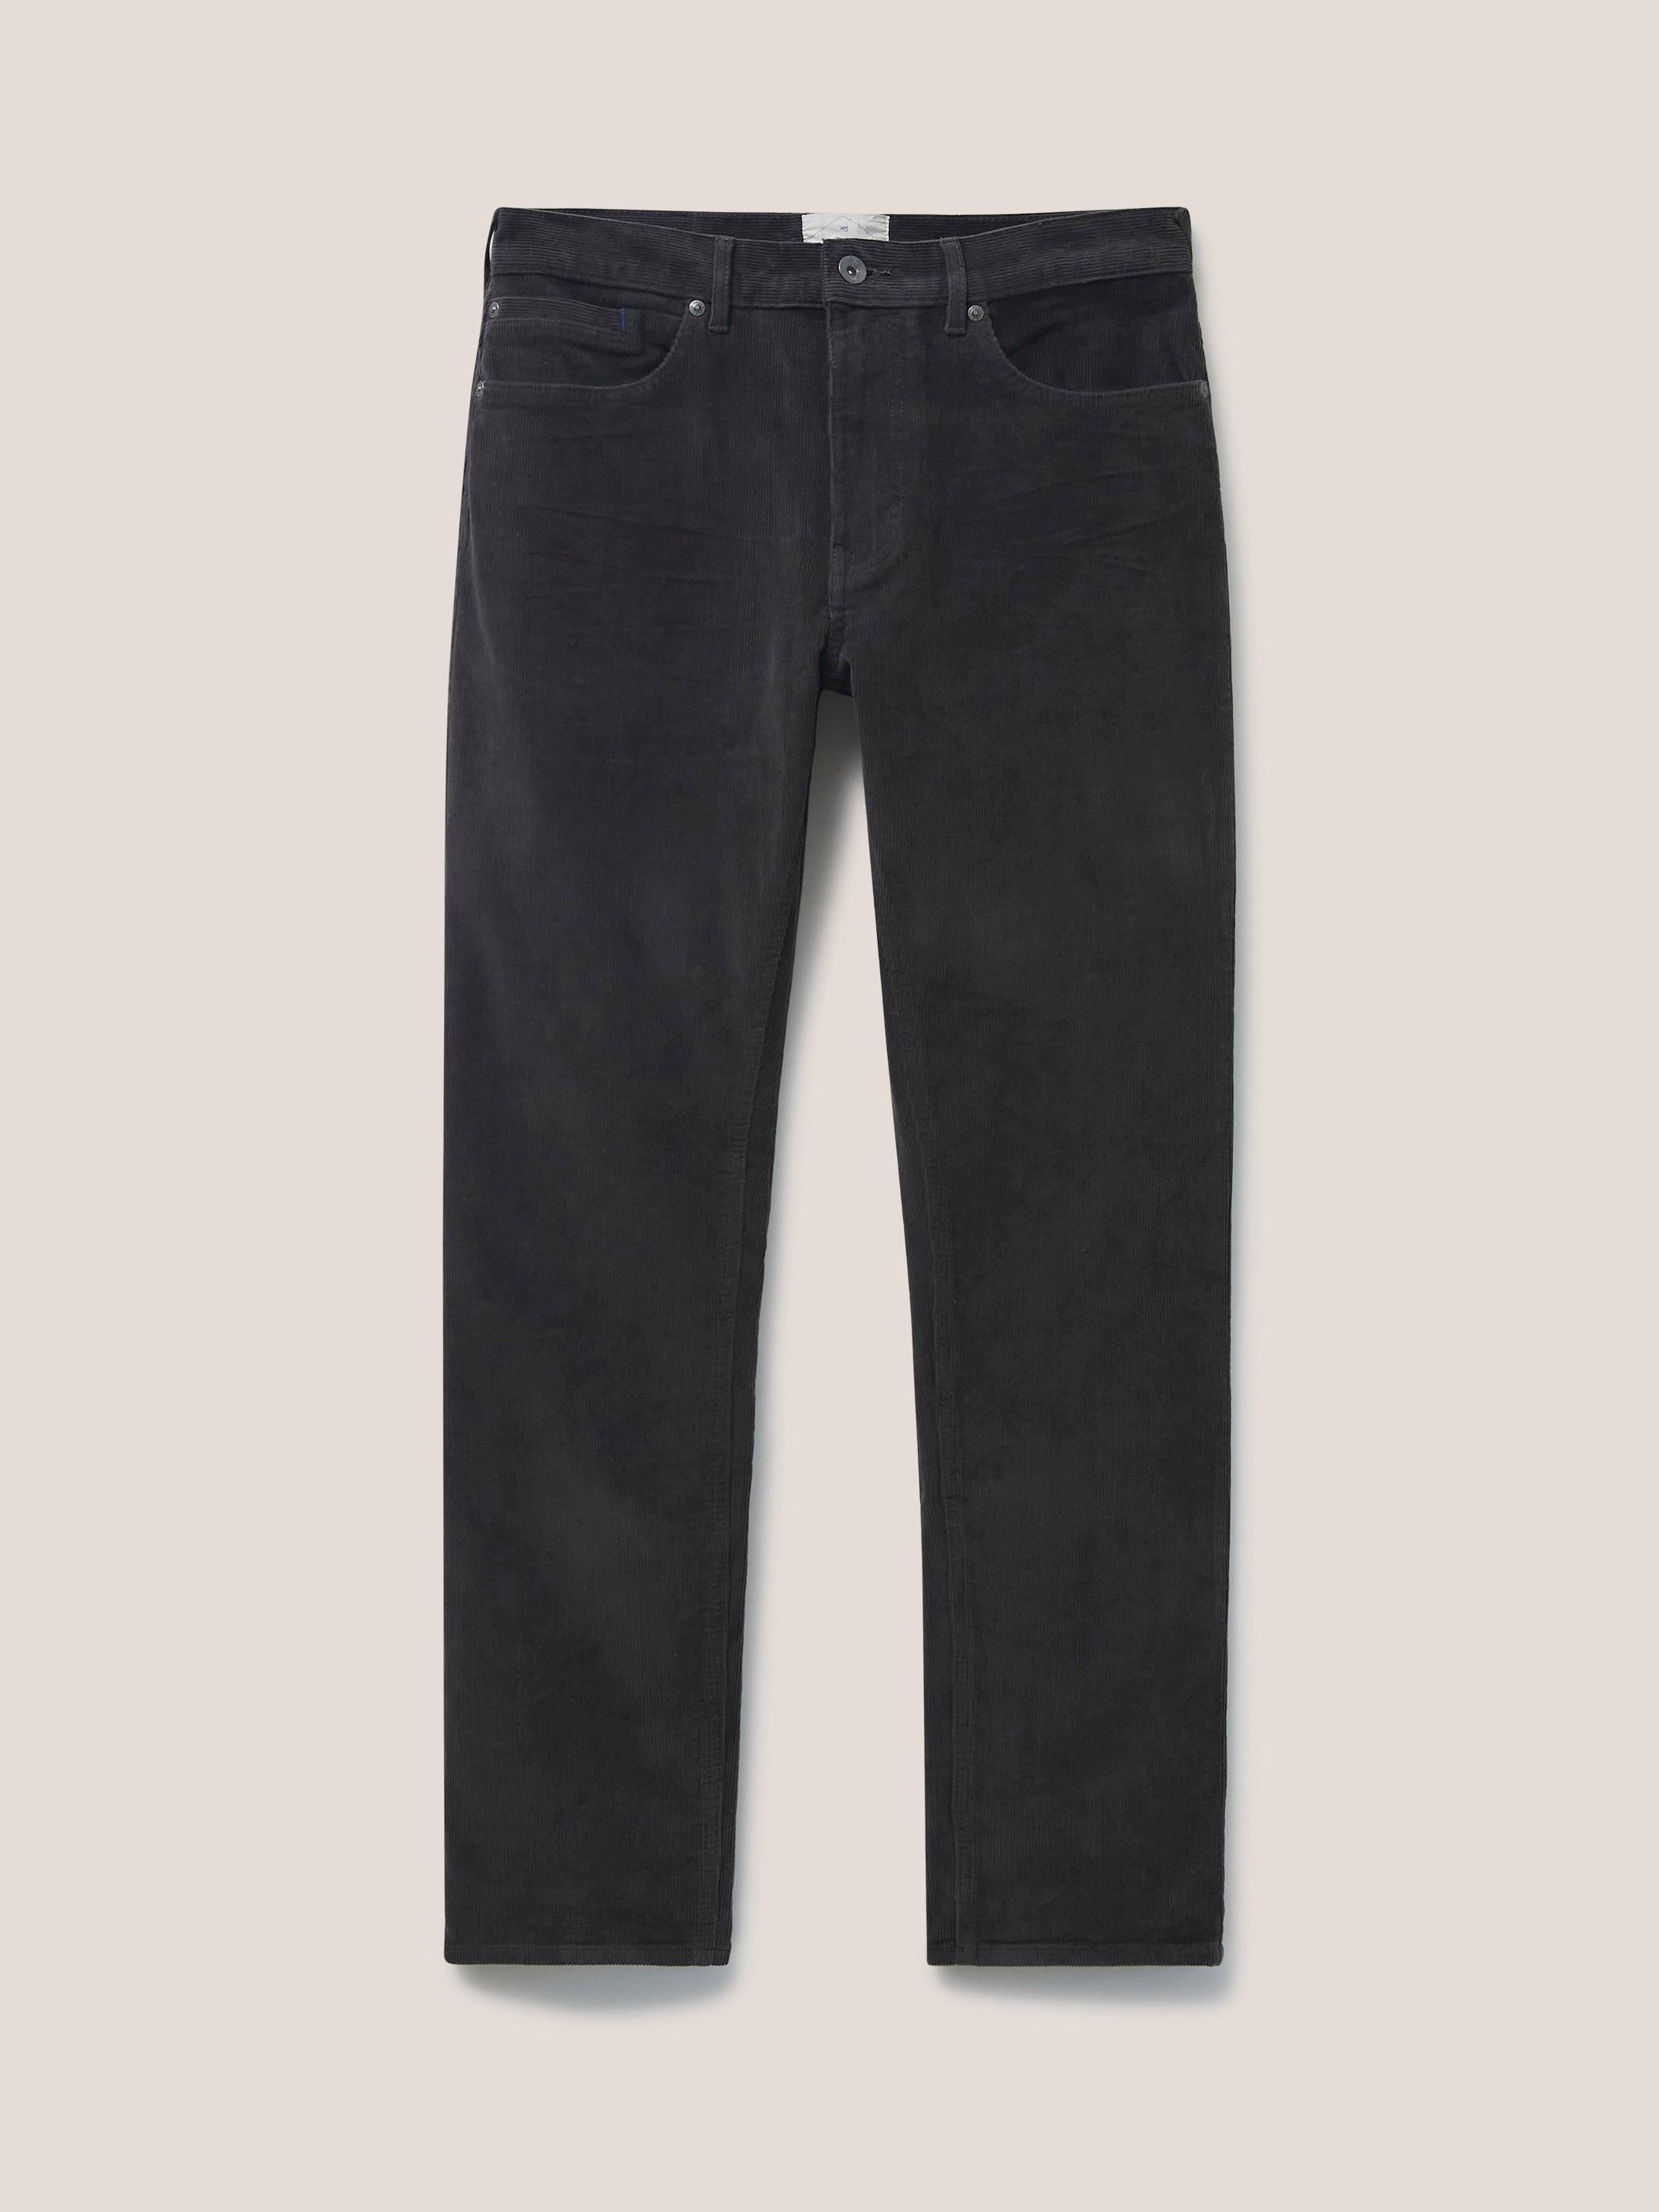 Crosby Cord Trouser in WASHED BLK - FLAT FRONT